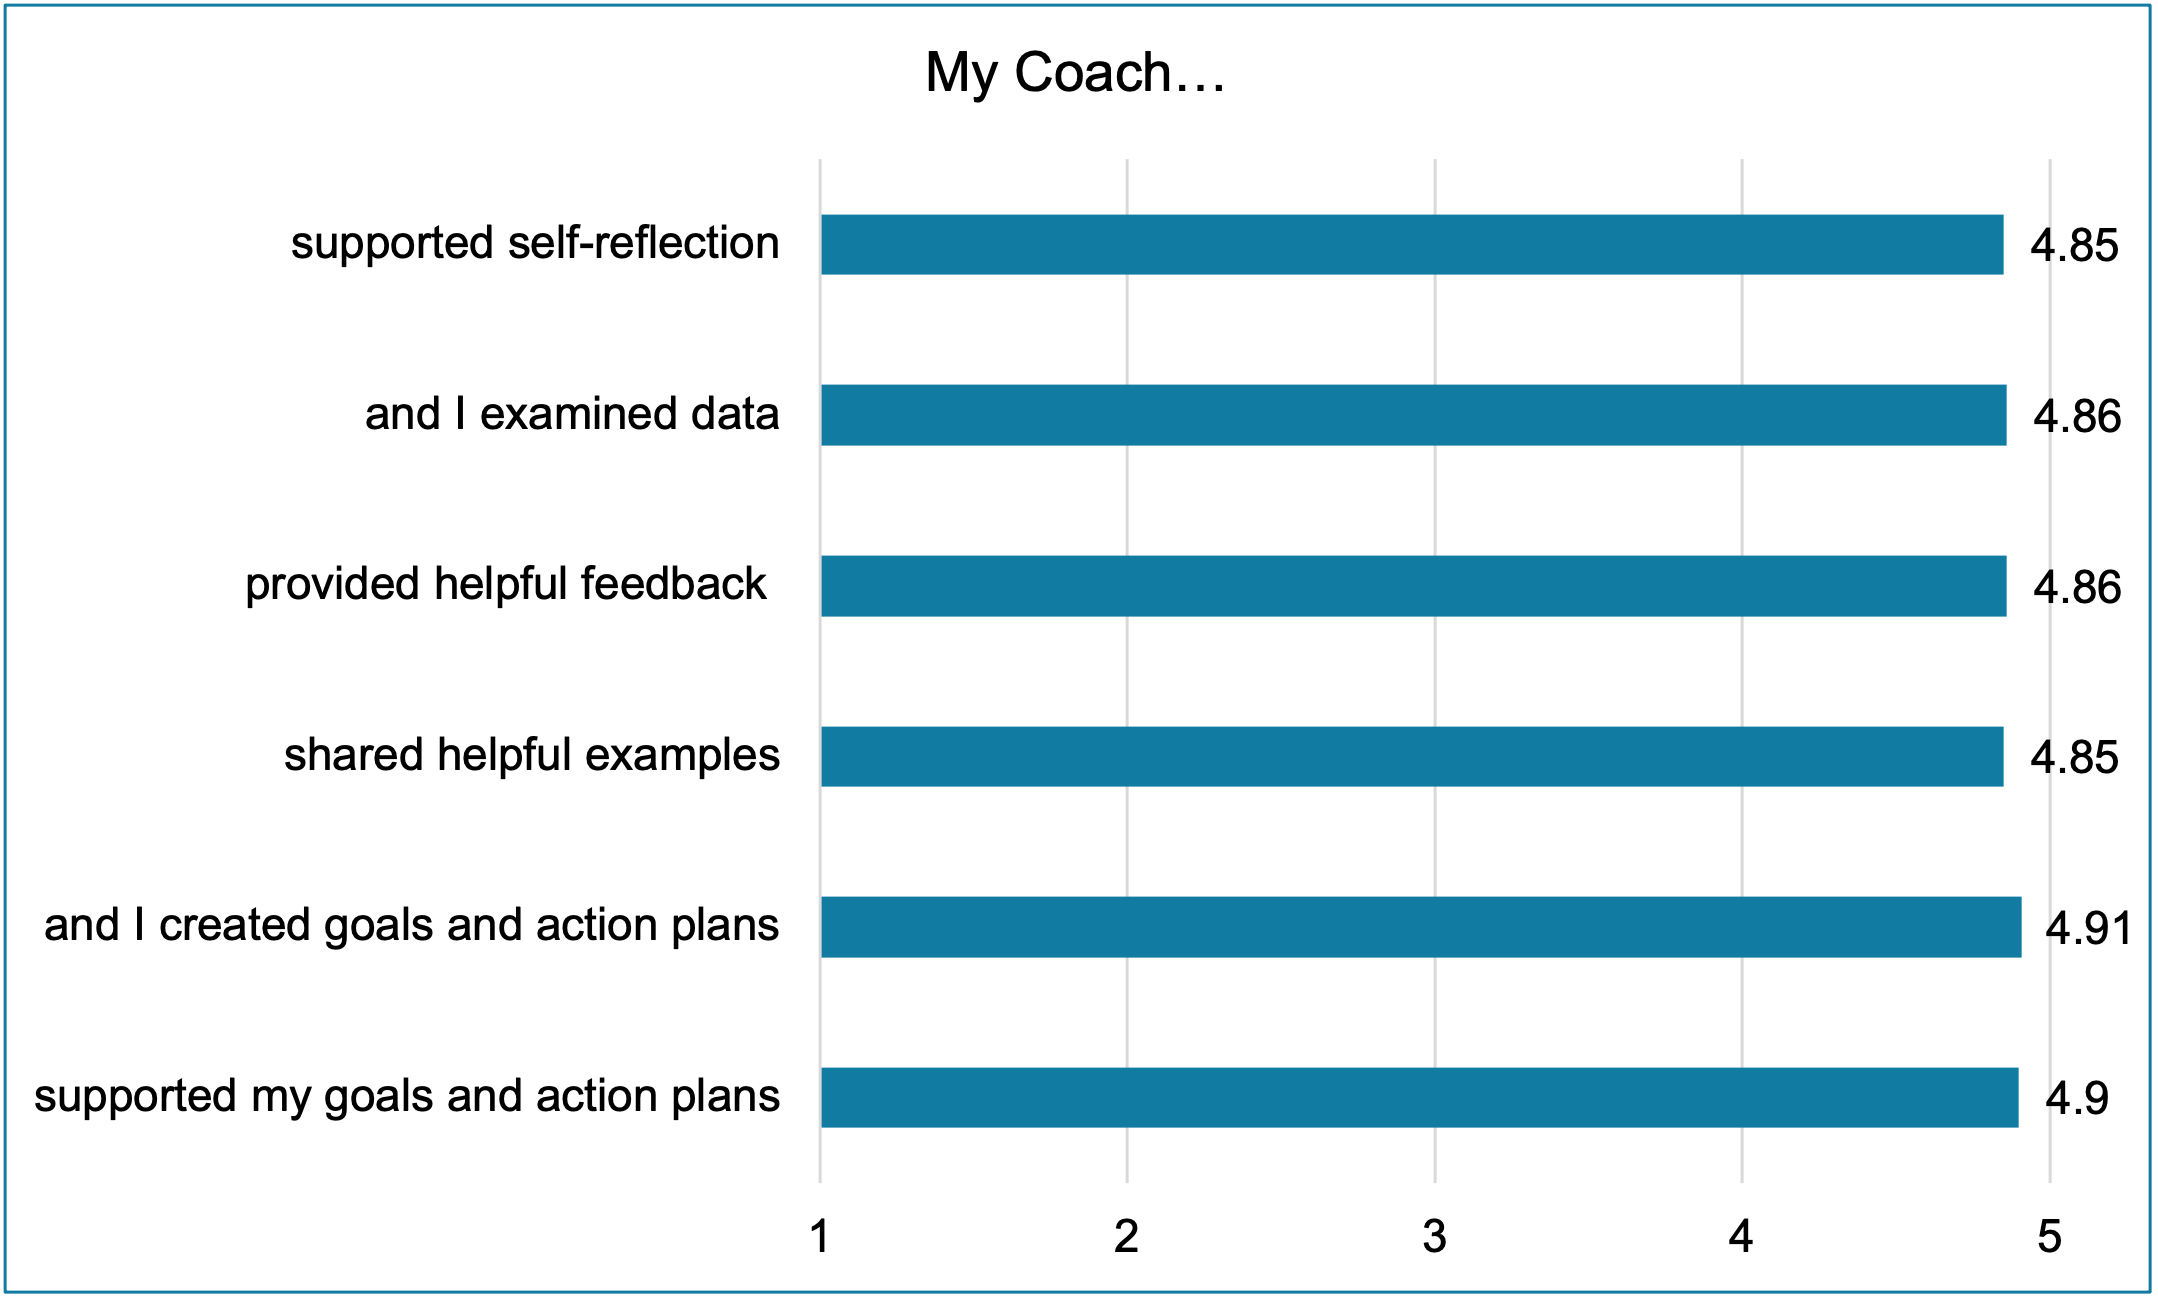 Table 3: BEST in CLASS Teacher Exit Ticket Responses out of a scale of 5. My Coach...Supported self-reflection: 4.85; and I examined data: 4.86; Provided helpful feedback: 4.86; shared helpful examples: 4.85; and I created goals and action plans: 4.91; Supported my goals and action plans: 4.9